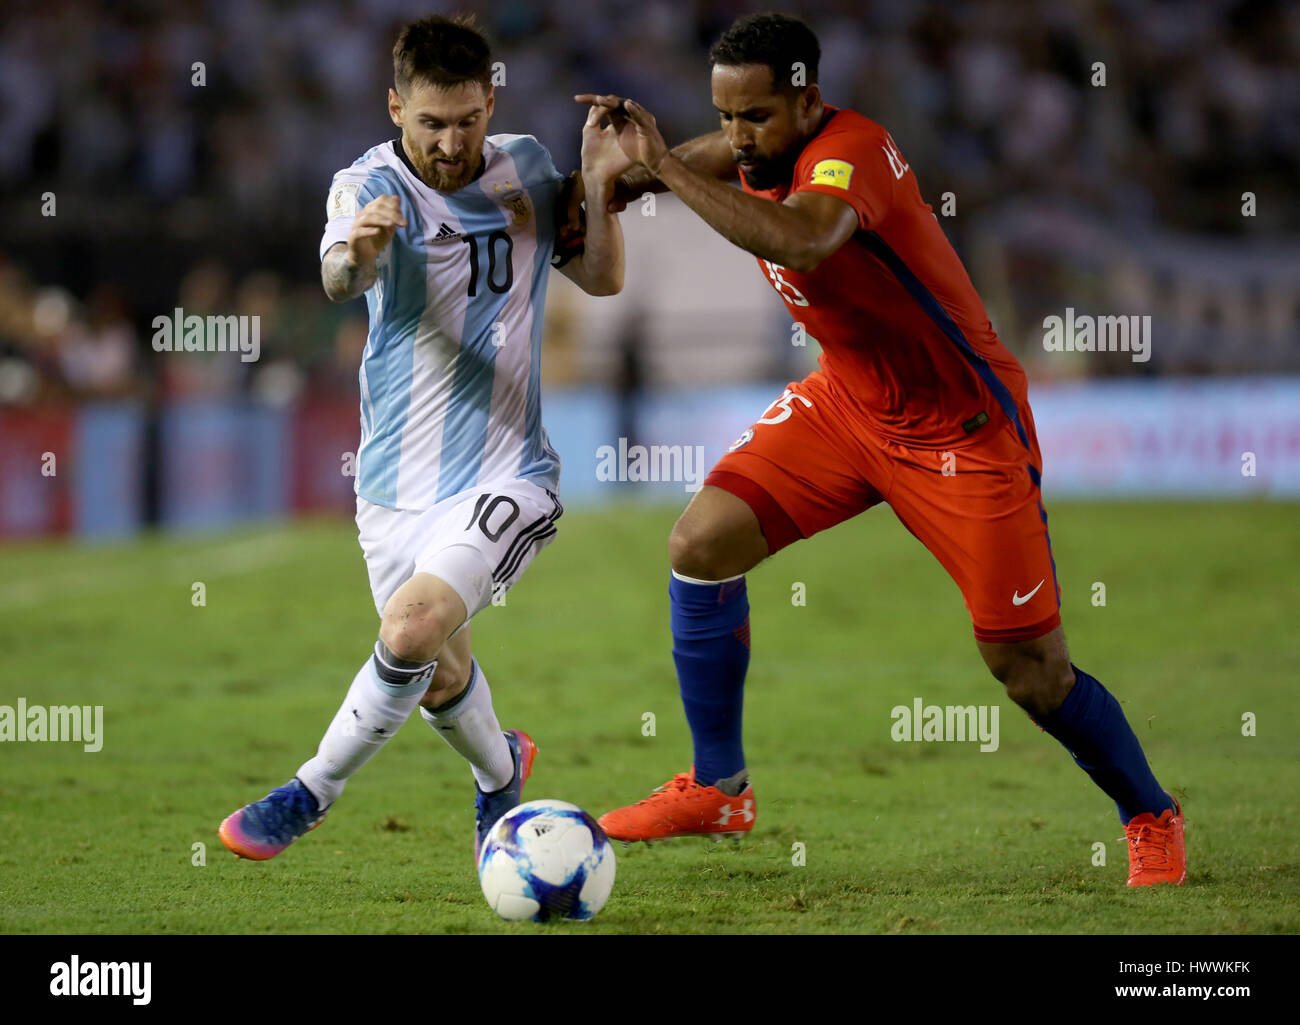 Buenos Aires, Argentina. 23rd Mar, 2017. Argentina's Lionel Messi (L) vies for the ball with Chile's Jean Beausejour (R) during the match for the South American qualifiers for the Russia 2018 FIFA World Cup, held in the Antonio Vespucio Liberti stadium, Buenos Aires, Argentina, on March 23, 2017. Credit: Martin Zabala/Xinhua/Alamy Live News Stock Photo